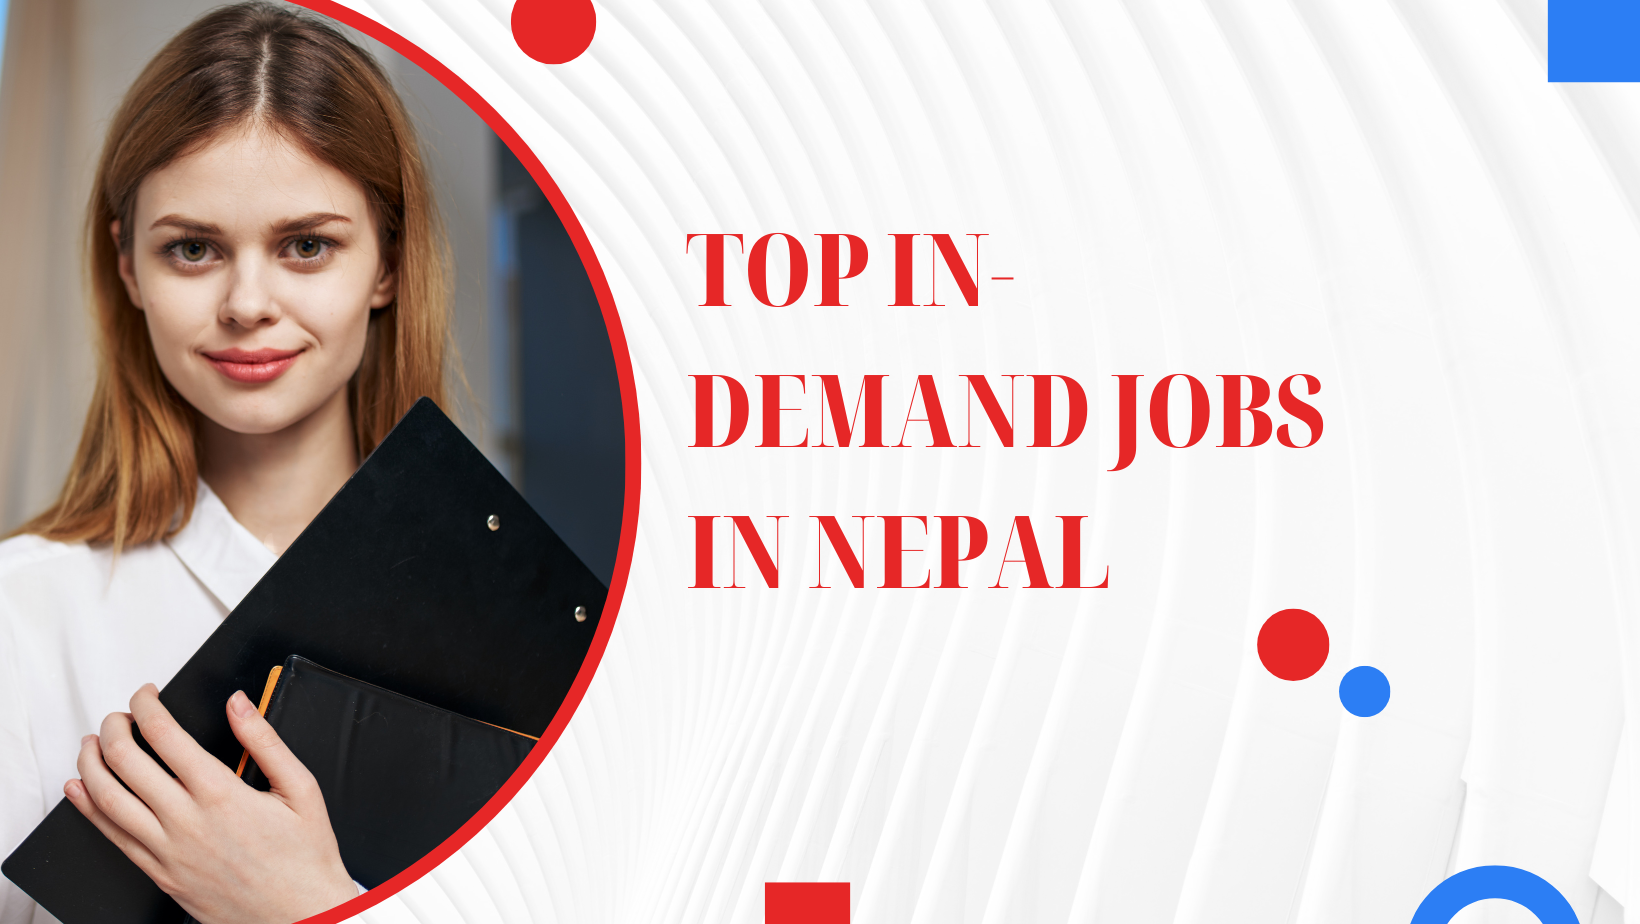 The top in-demand jobs in Nepal for the future and how to prepare for them